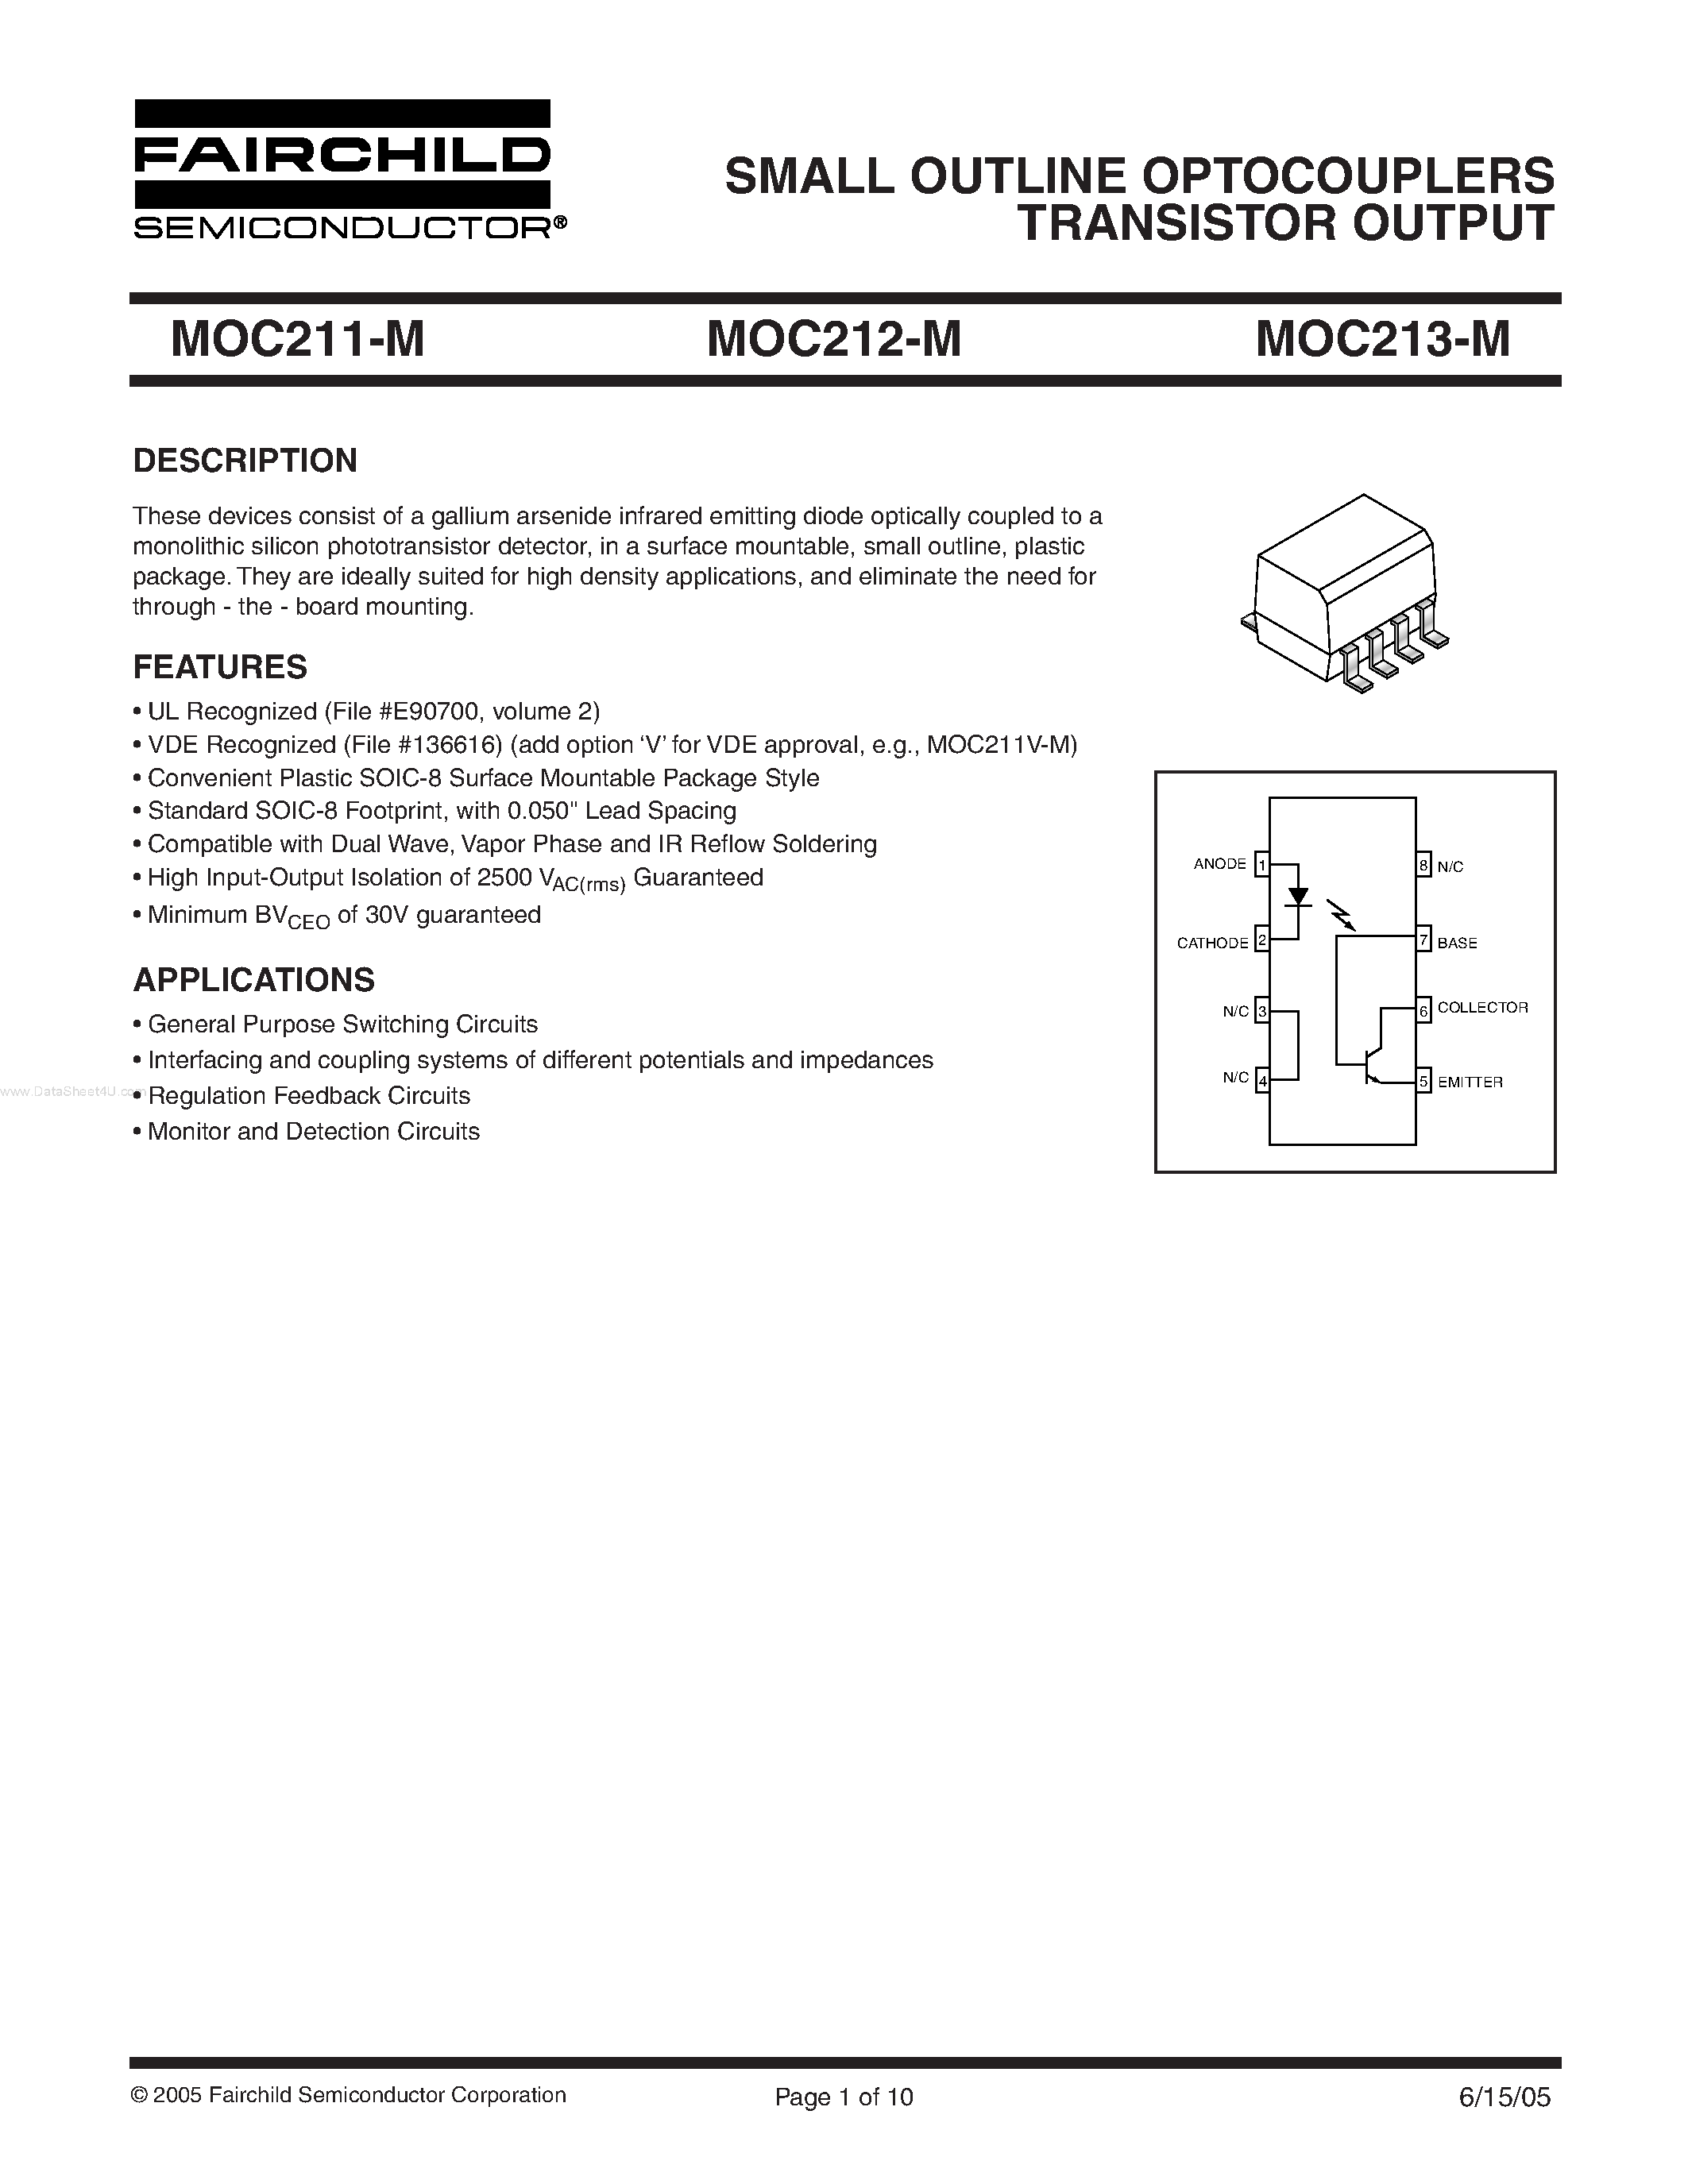 Datasheet MOC211-M - (MOC211-M - MOC213-M) SMALL OUTLINE OPTOCOUPLERS TRANSISTOR OUTPUT page 1